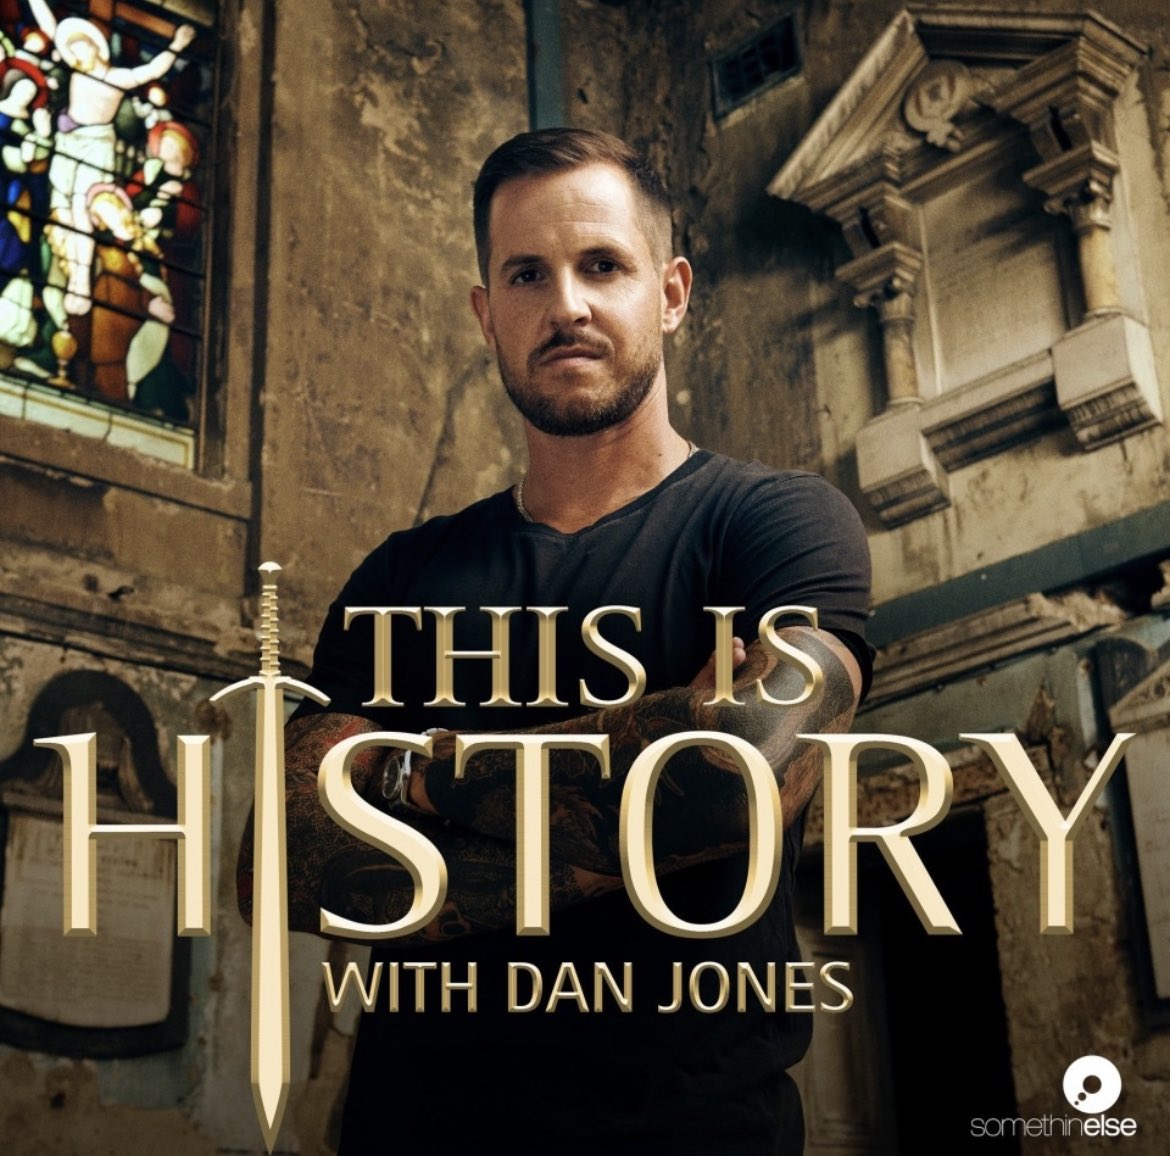 “In the mad world of the Plantagenets, when the games stop the blood flows.”

Hosted by @dgjones, the podcast “This is History” is incredibly well-written and meticulously researched. Highly recommend!!

#ThisIsHistory ⚔️